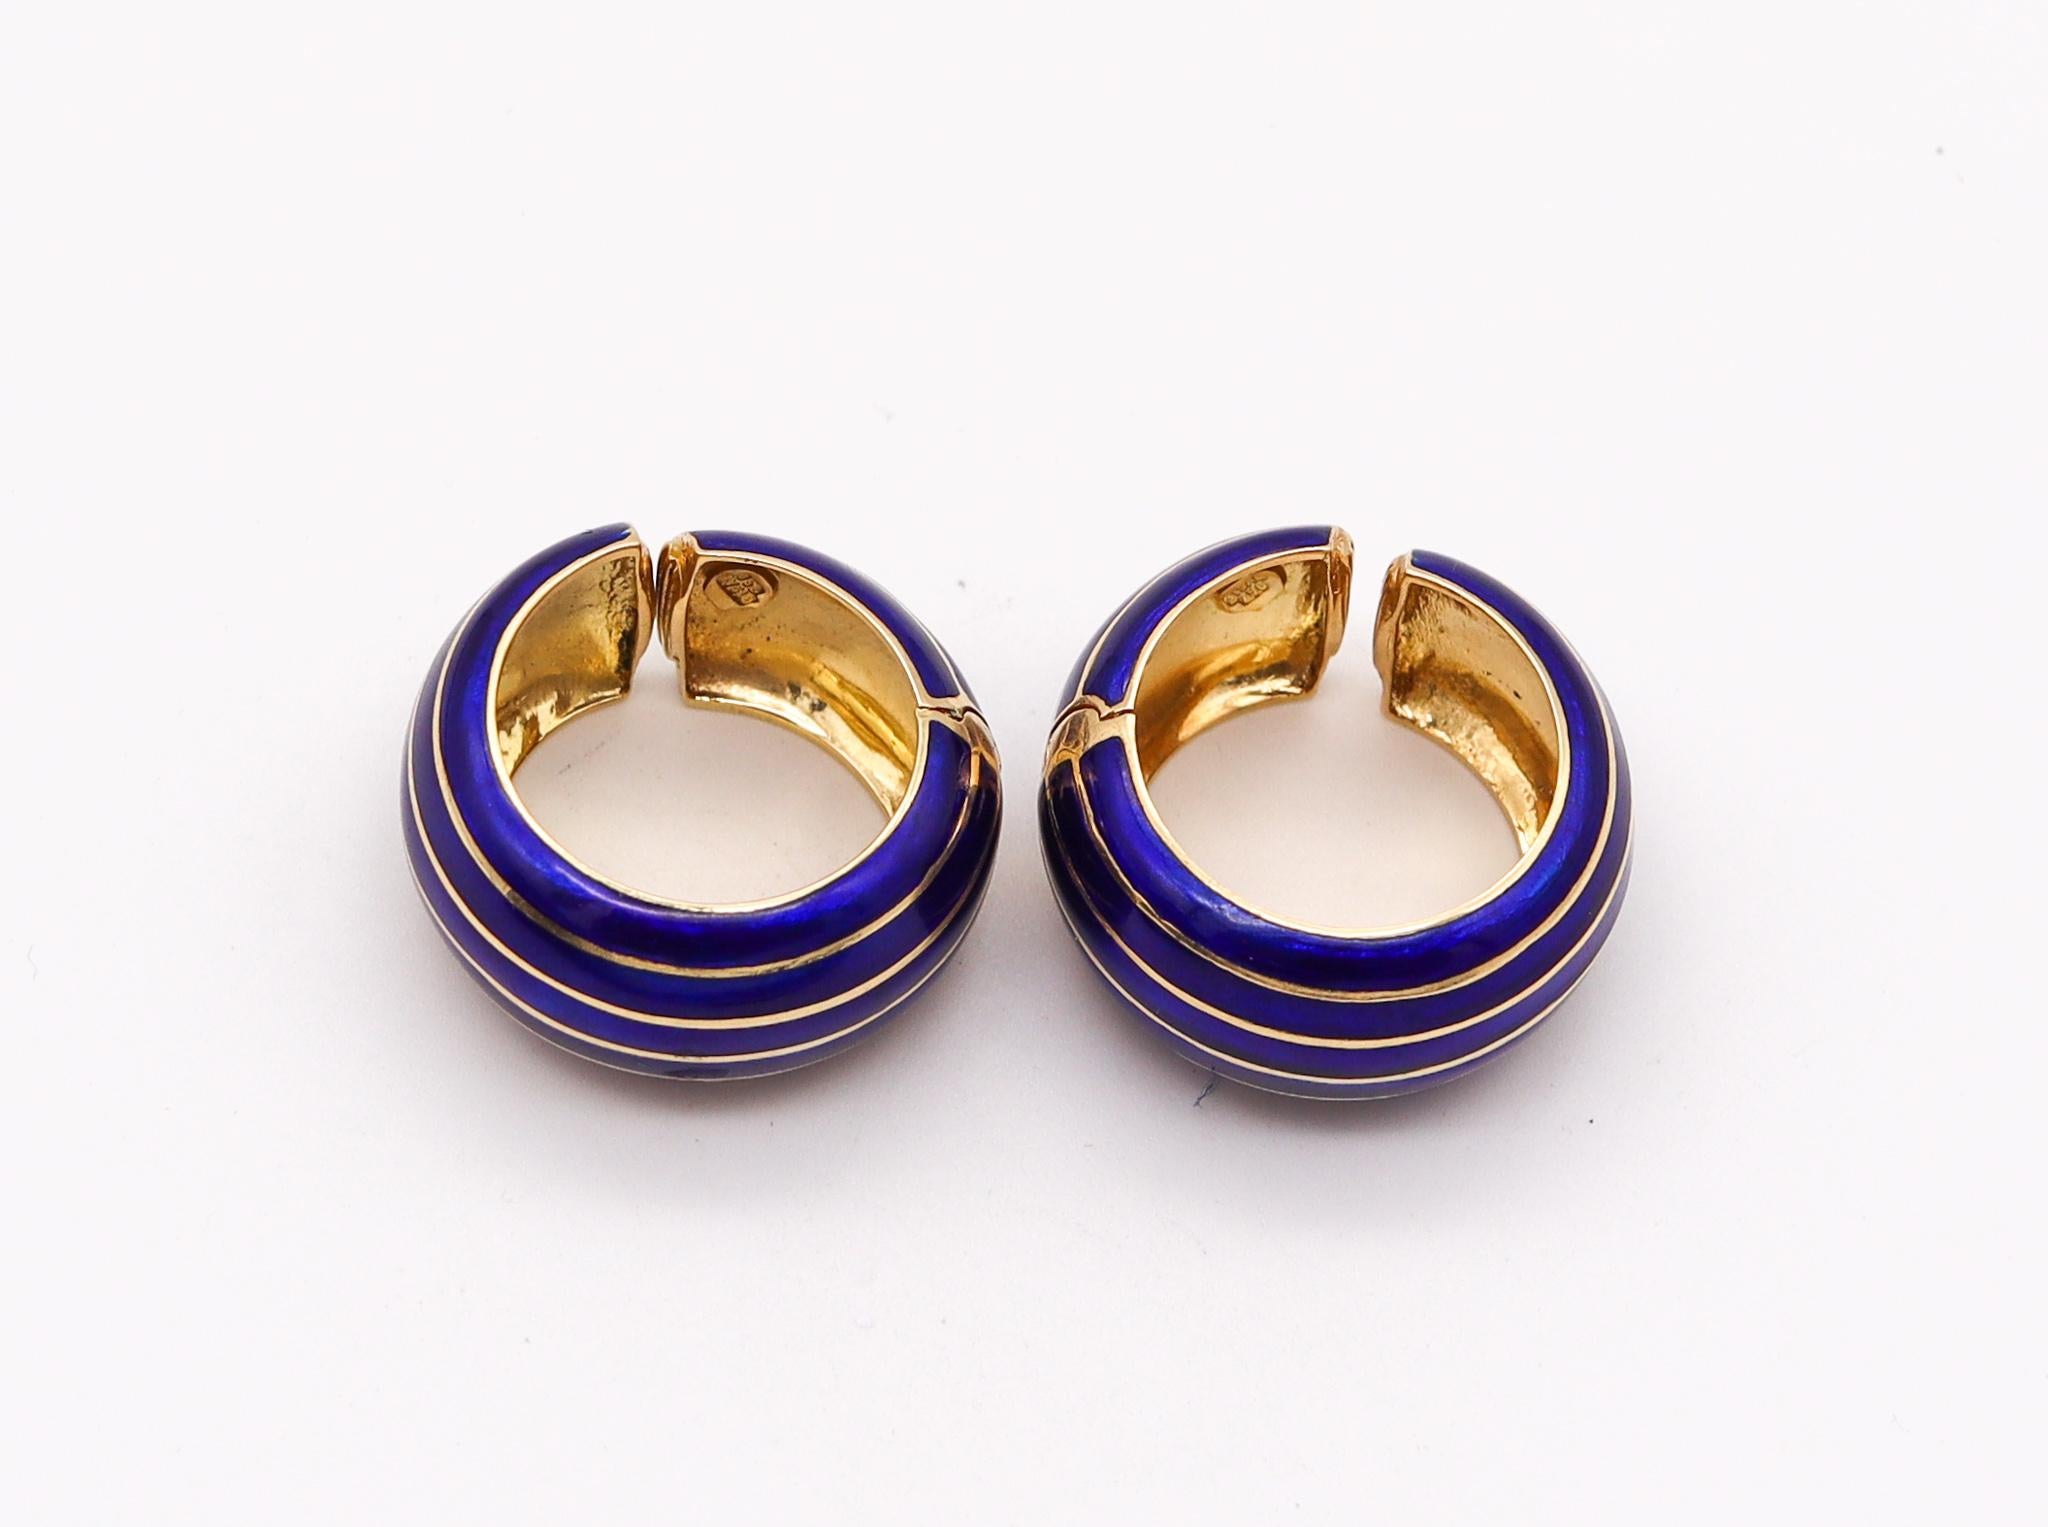 Geometric earrings with blue enamel designed by Ottavio Molina

Colorful pair of hoops earrings, created in Alessandria Italy at the jewelry workshop of Ottavio Molina, back in the 1970. These beautiful pair has been crafted with geometric lines in